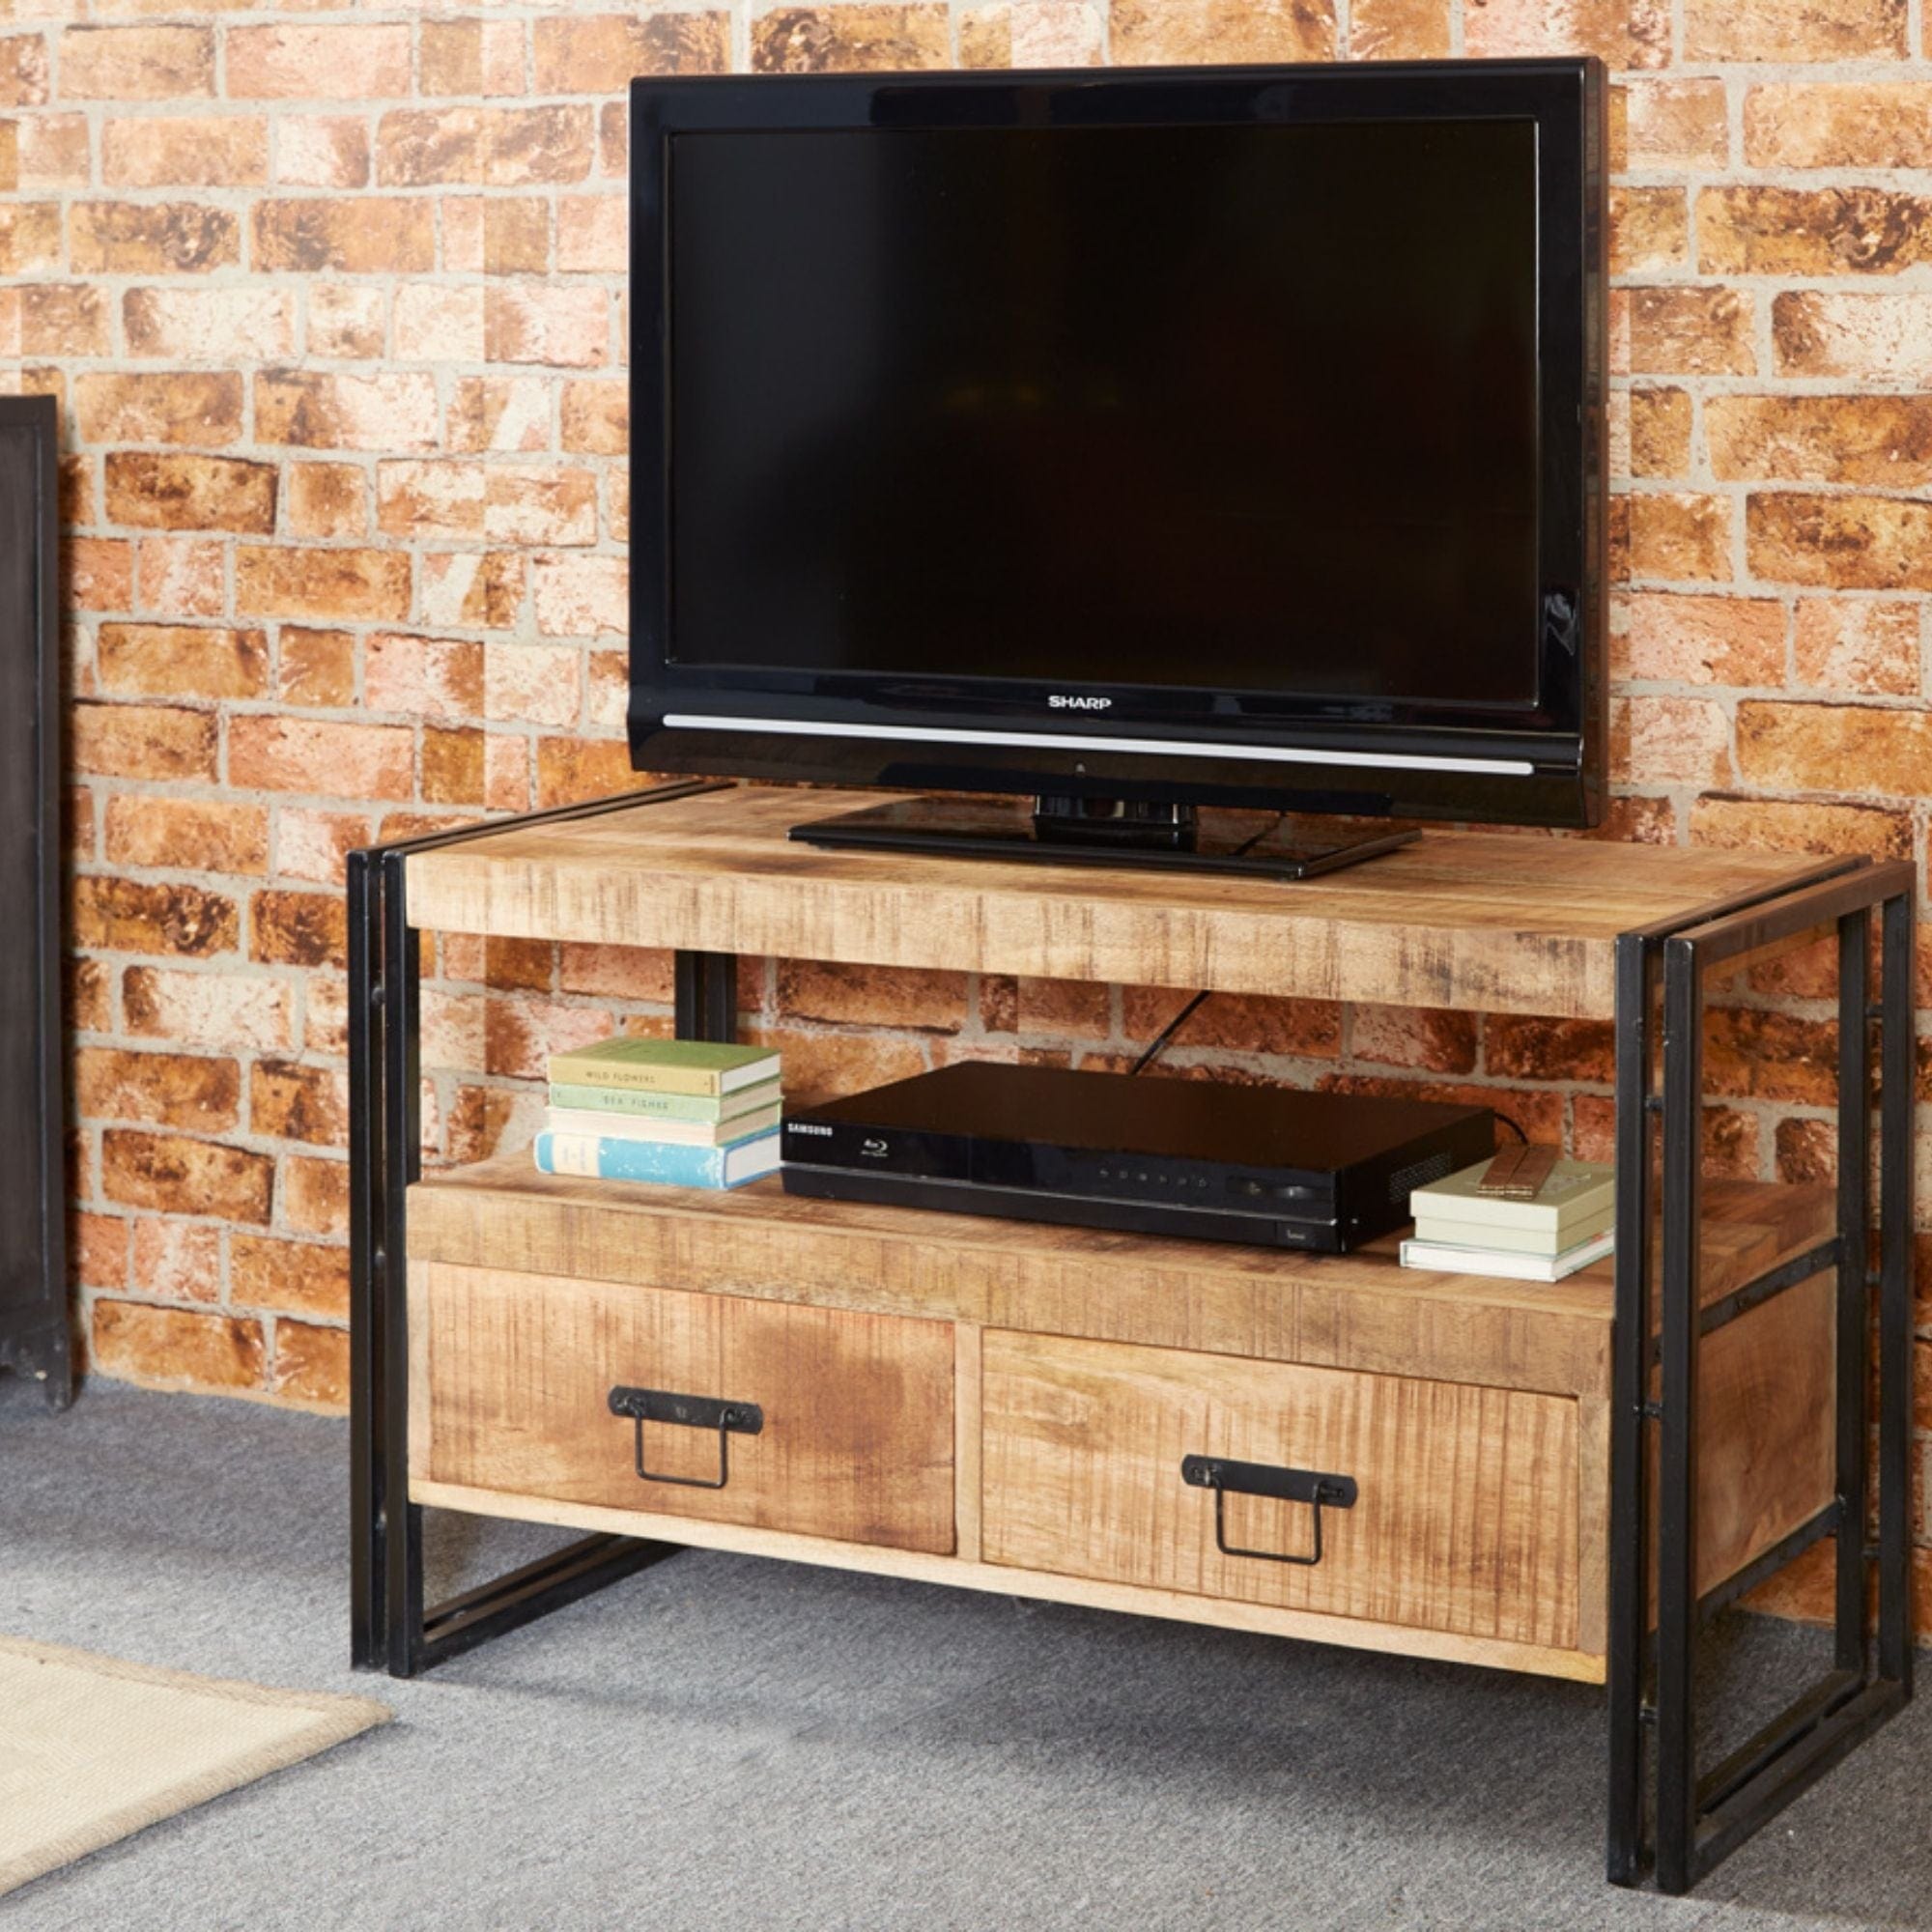 Loft small handmade industrial vintage style wooden TV stand with 2 drawers | malletandplane.com